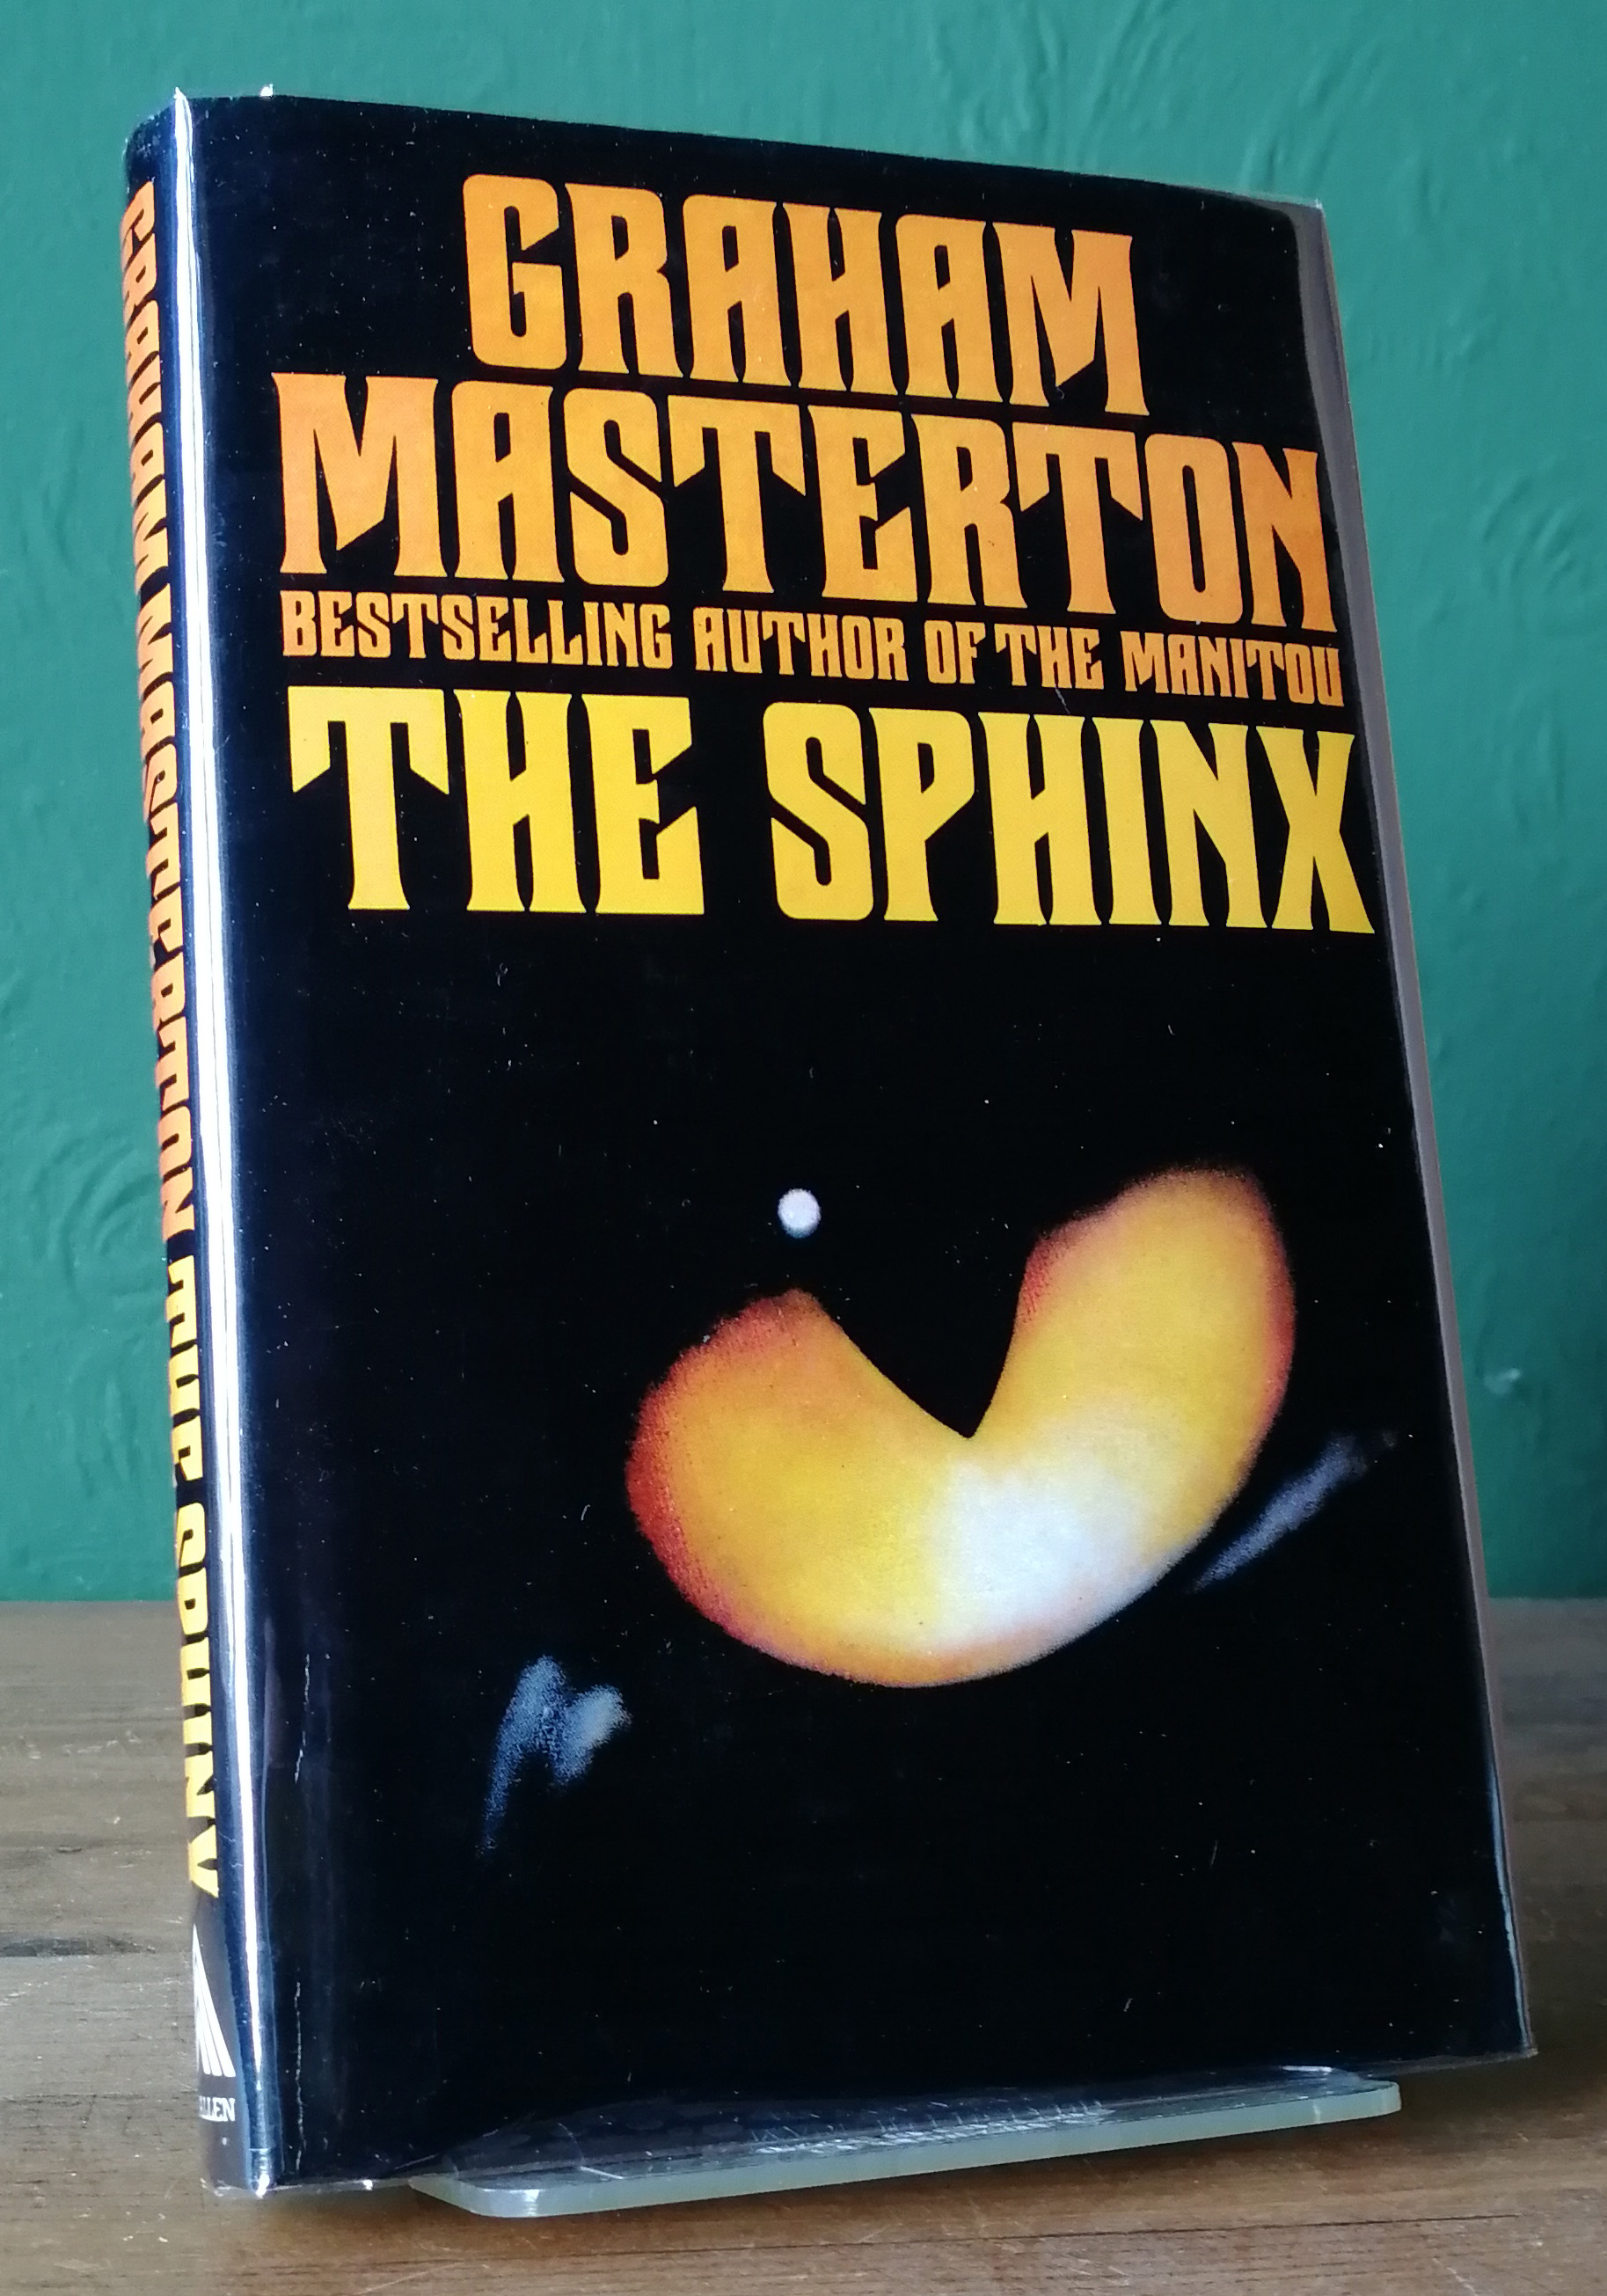 The Sphinx UK First Edition (Reprint)